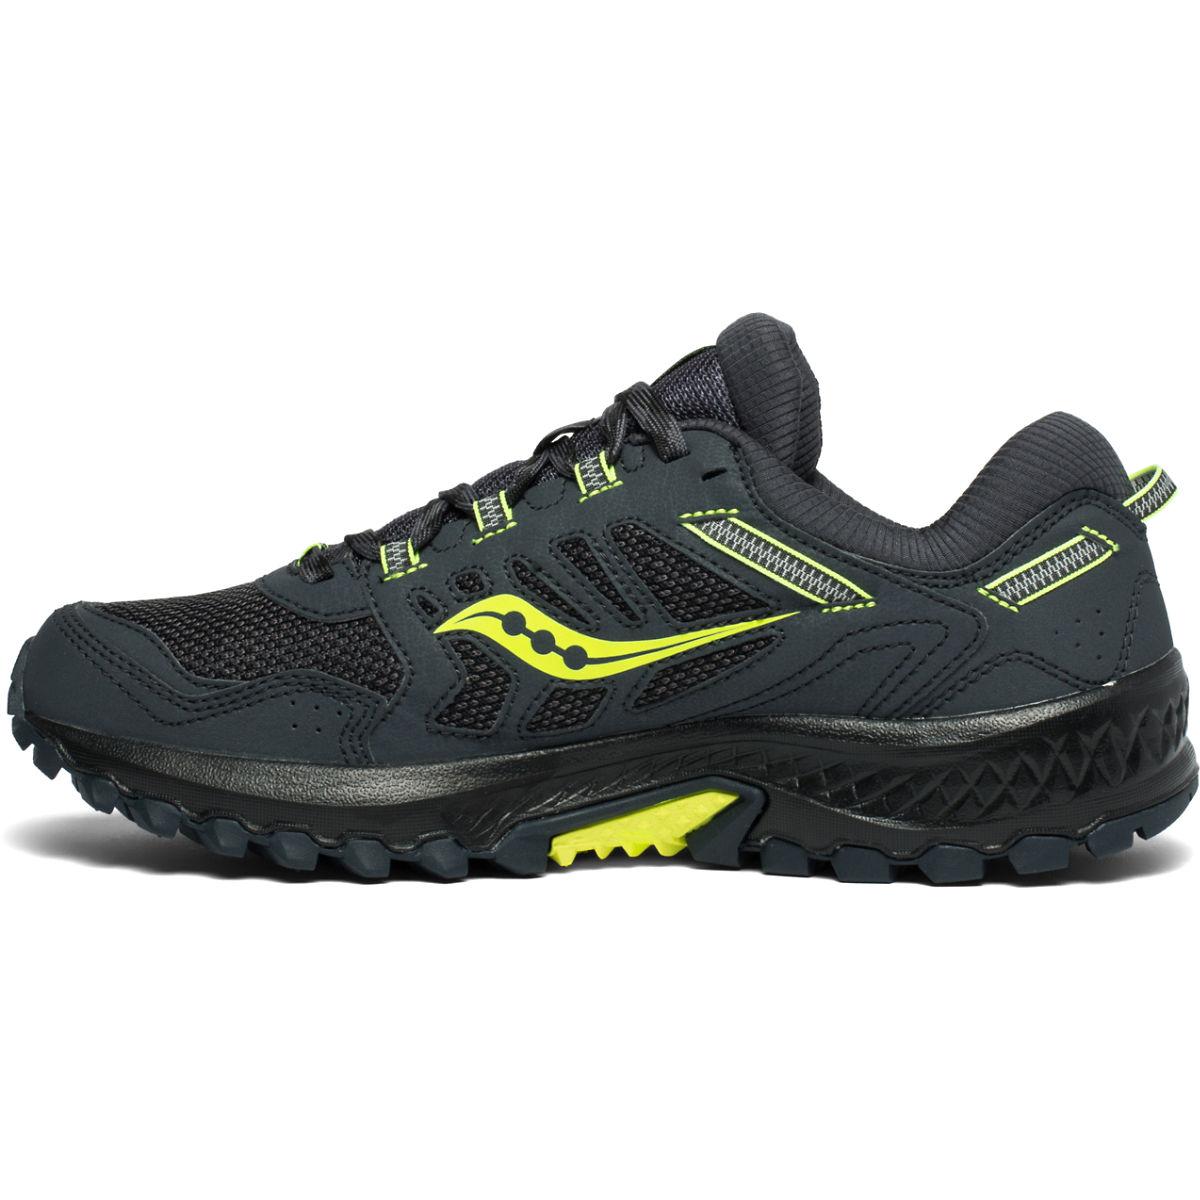 Saucony Excursion Tr13 Trail Shoes in Gray for Men - Lyst